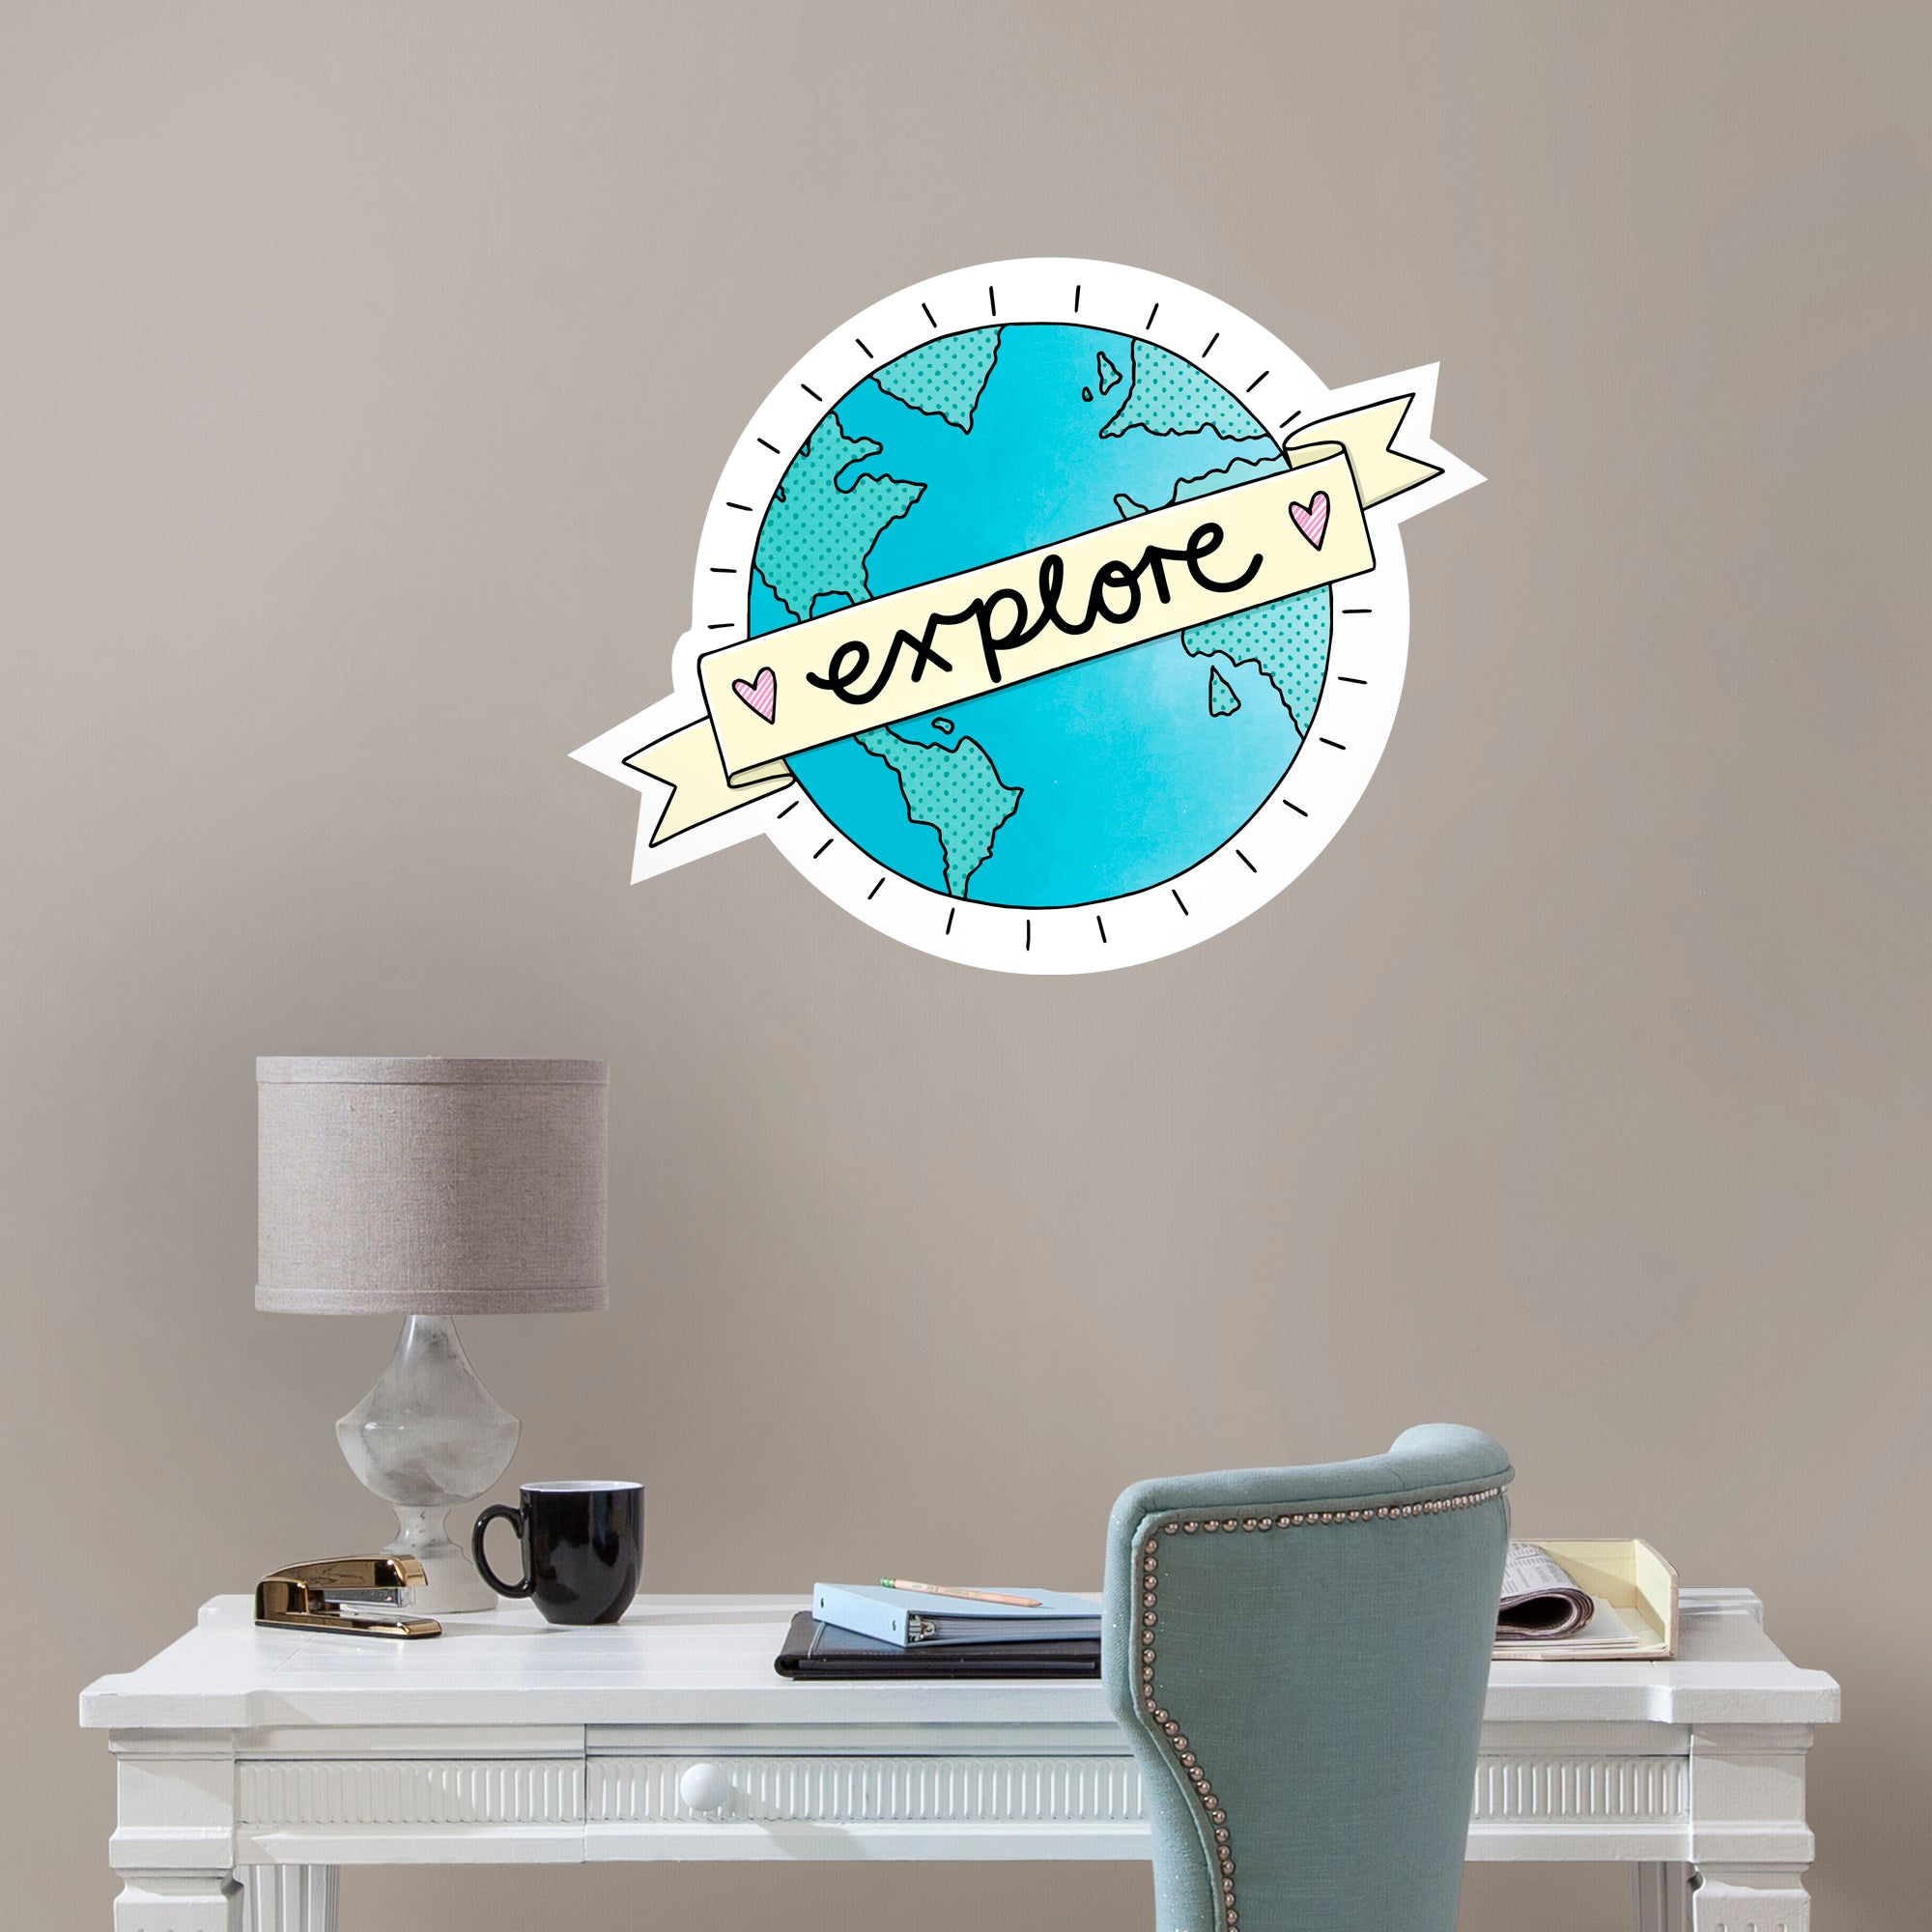 Explore Earth - Officially Licensed Big Moods Removable Wall Decal XL by Fathead | Vinyl